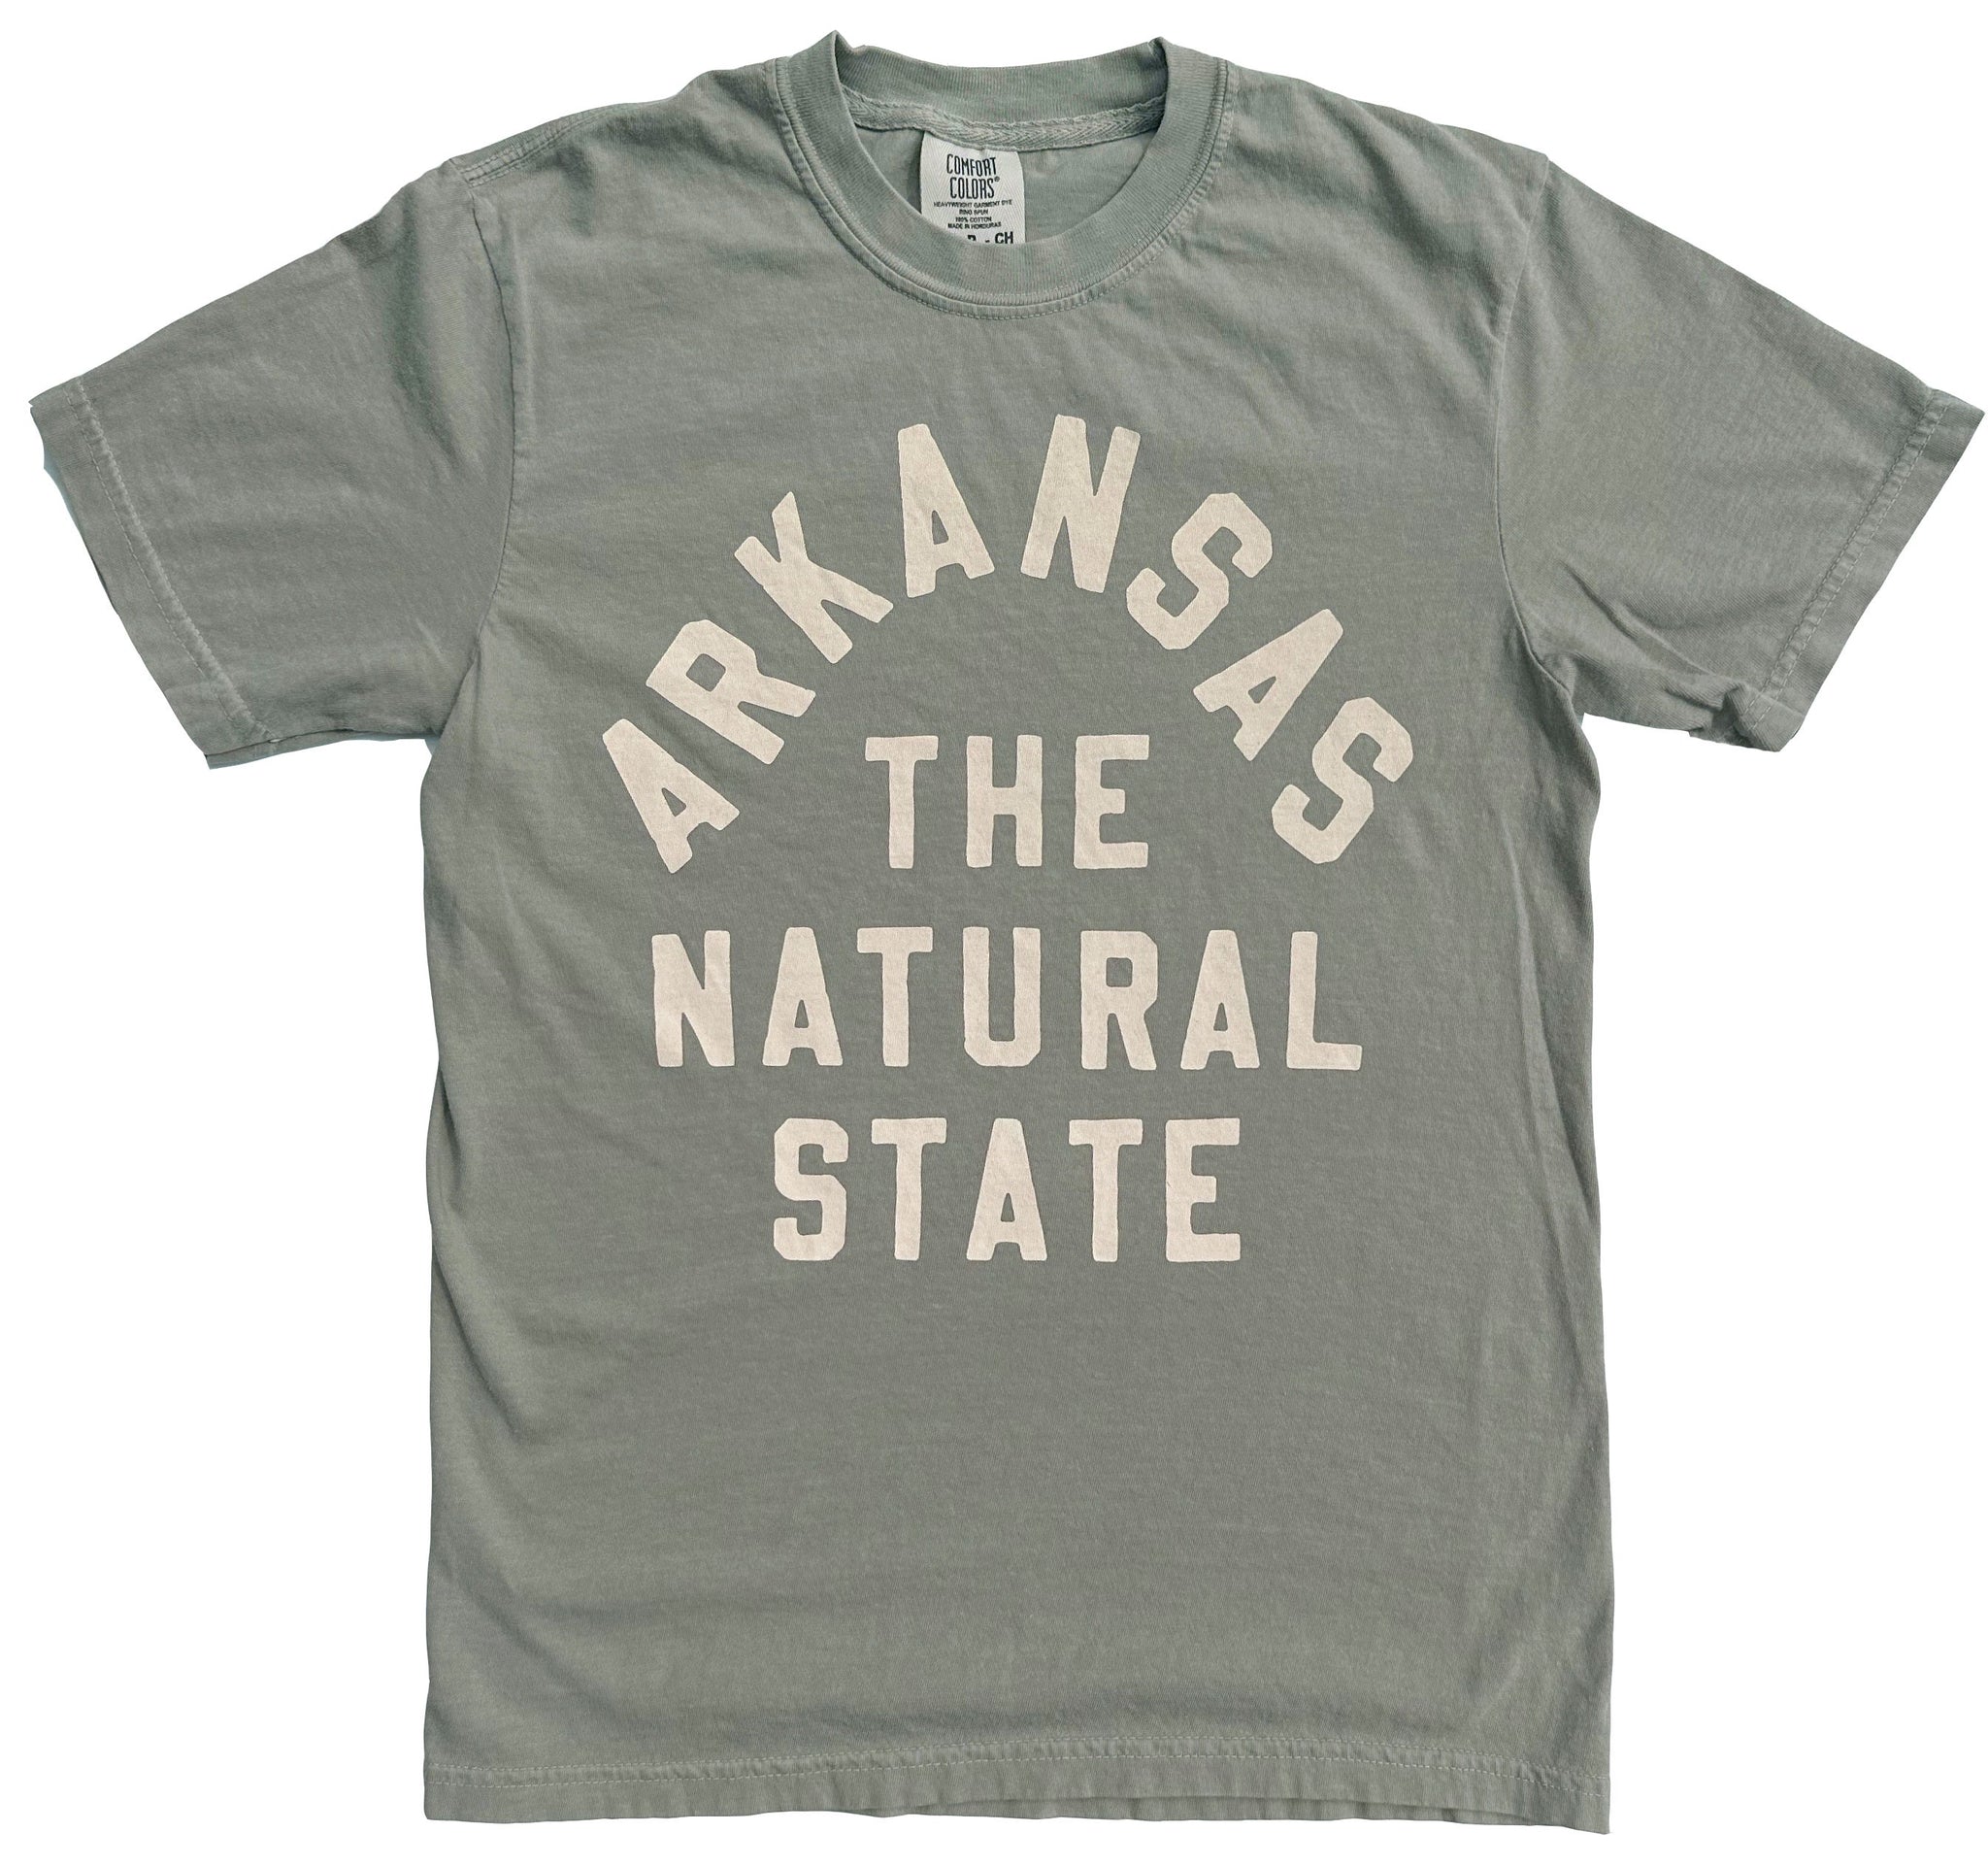 Arkansas the Natural State Tee in Sandstone